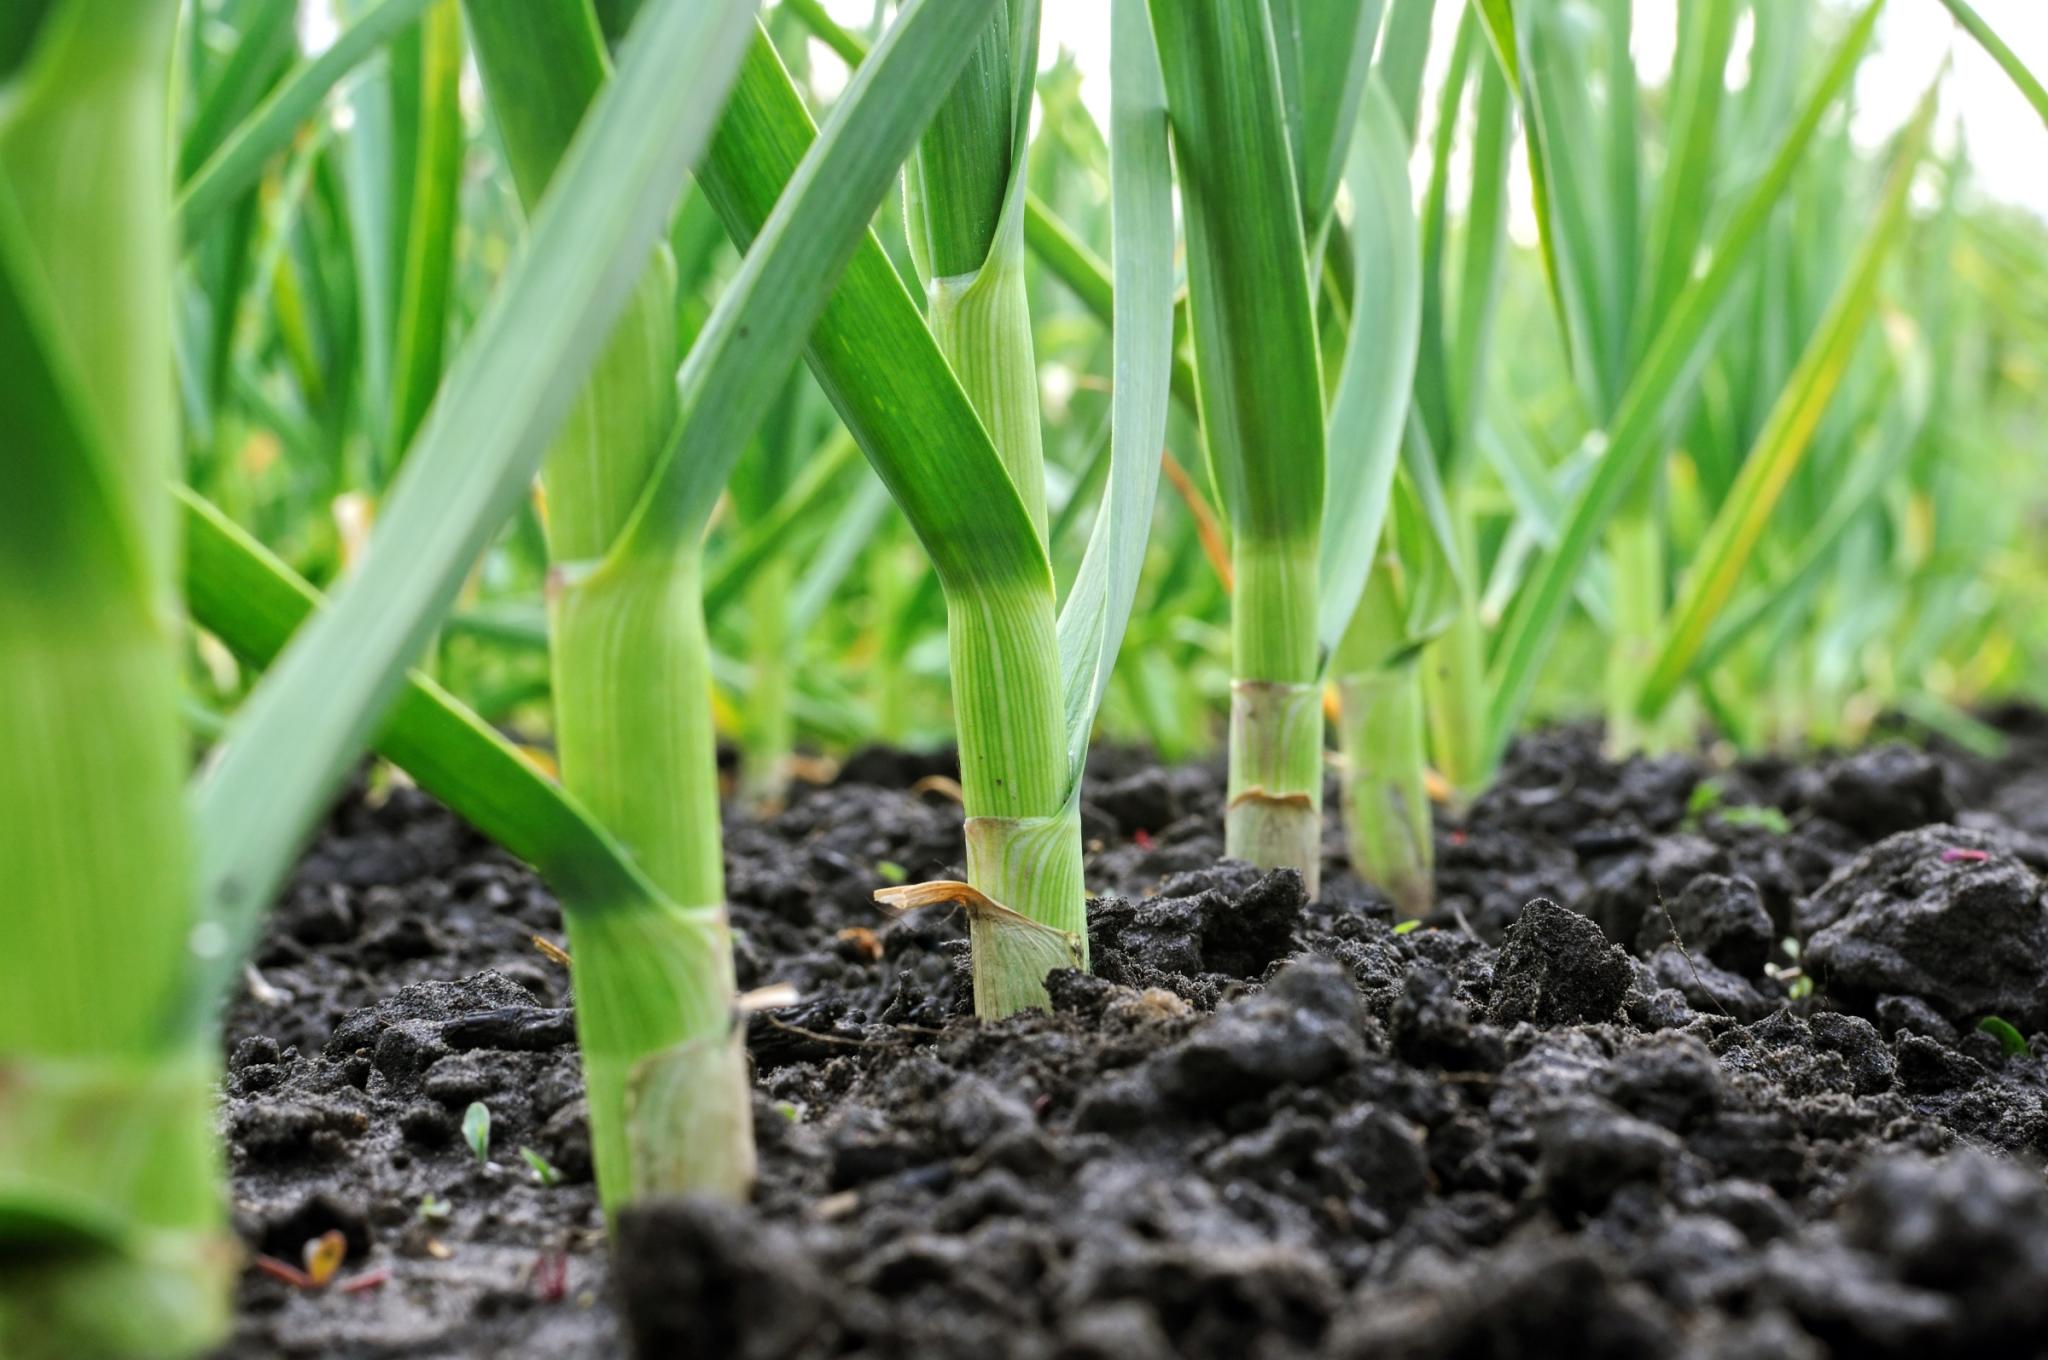 Garlic shoots growing out of soil. Photo by YuriyS/Getty Images